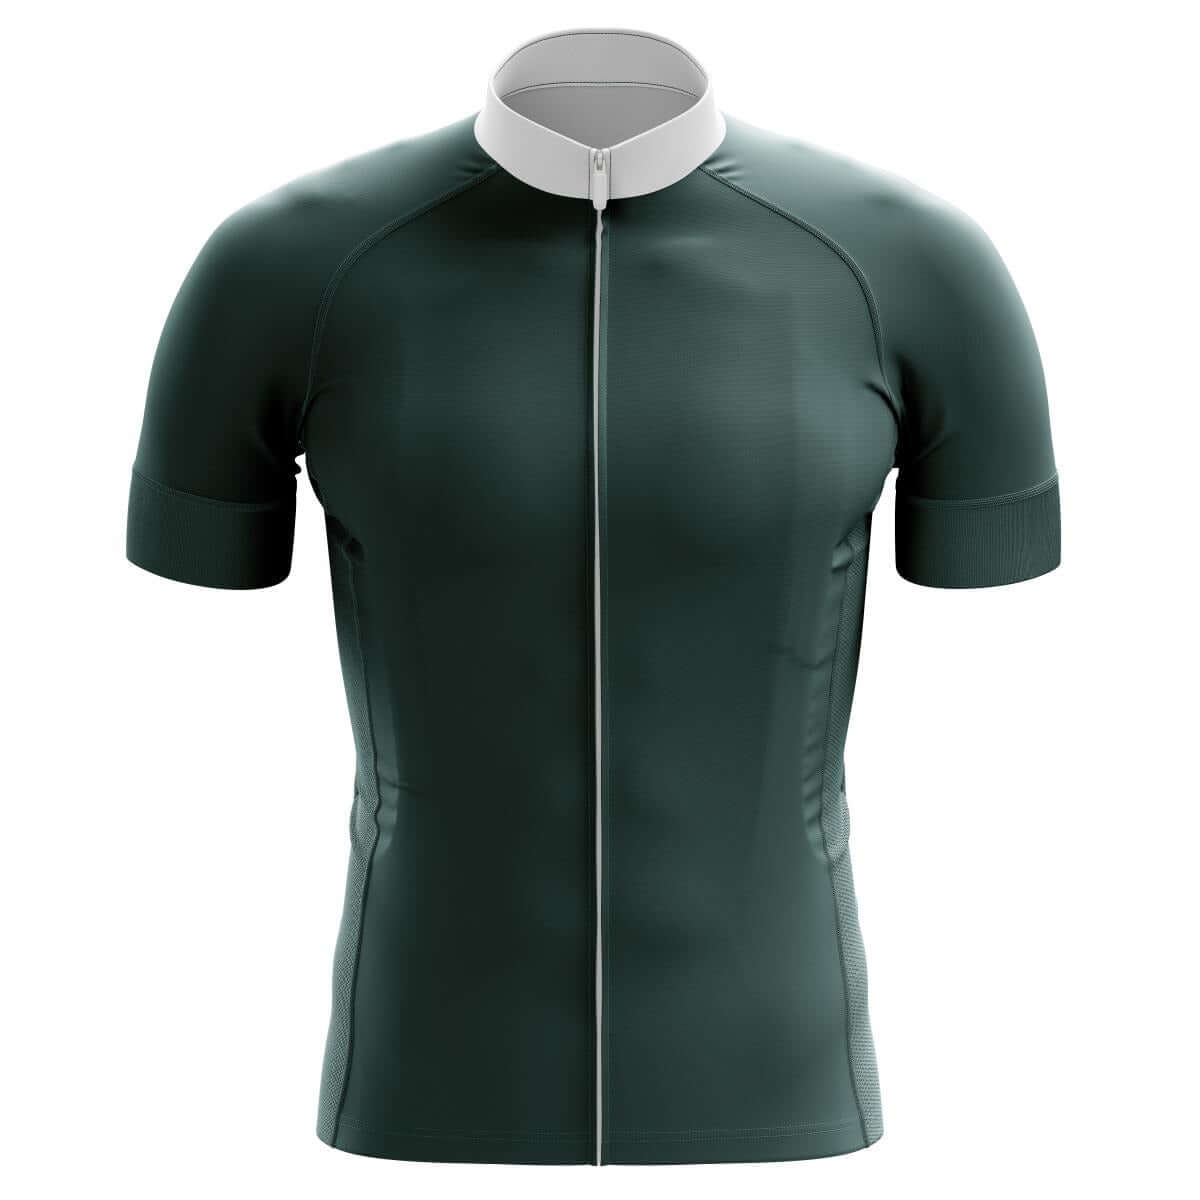 GG BASICS | Green With White Collar Cycling Jersey